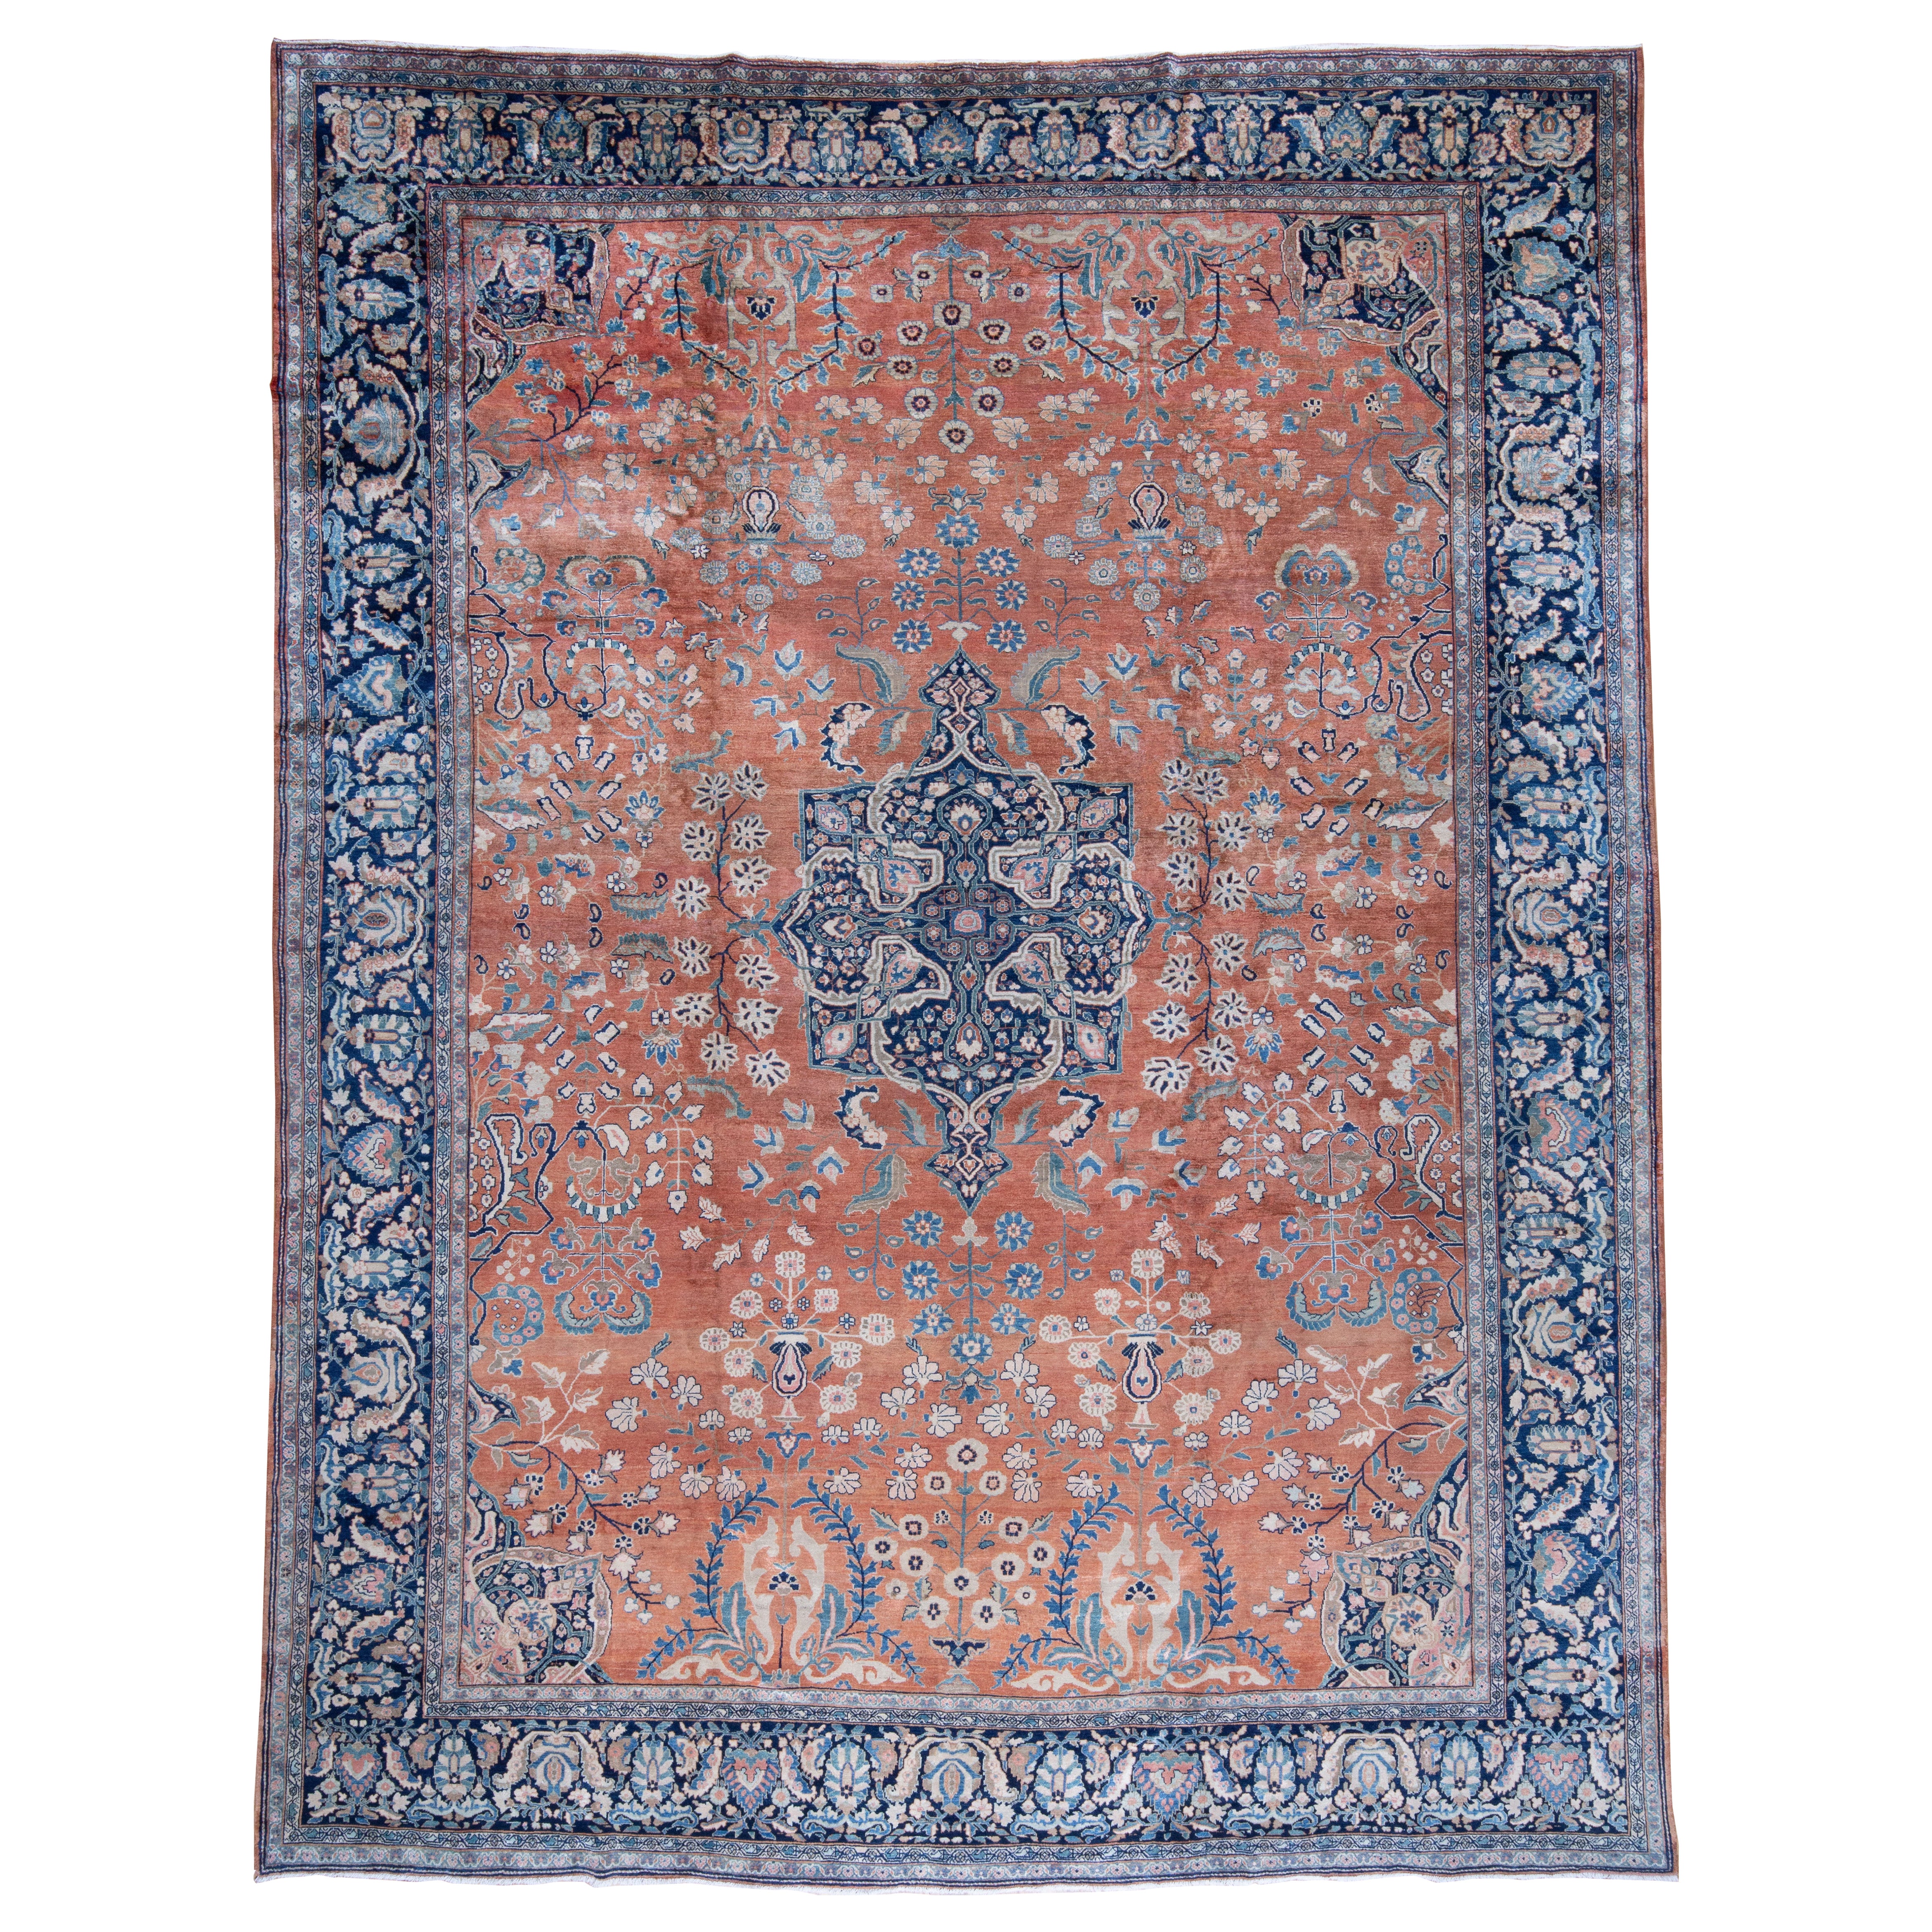 Oversized Antique Persian Ferahan Sarouk Coral and Blue Rug, late 19th Century For Sale